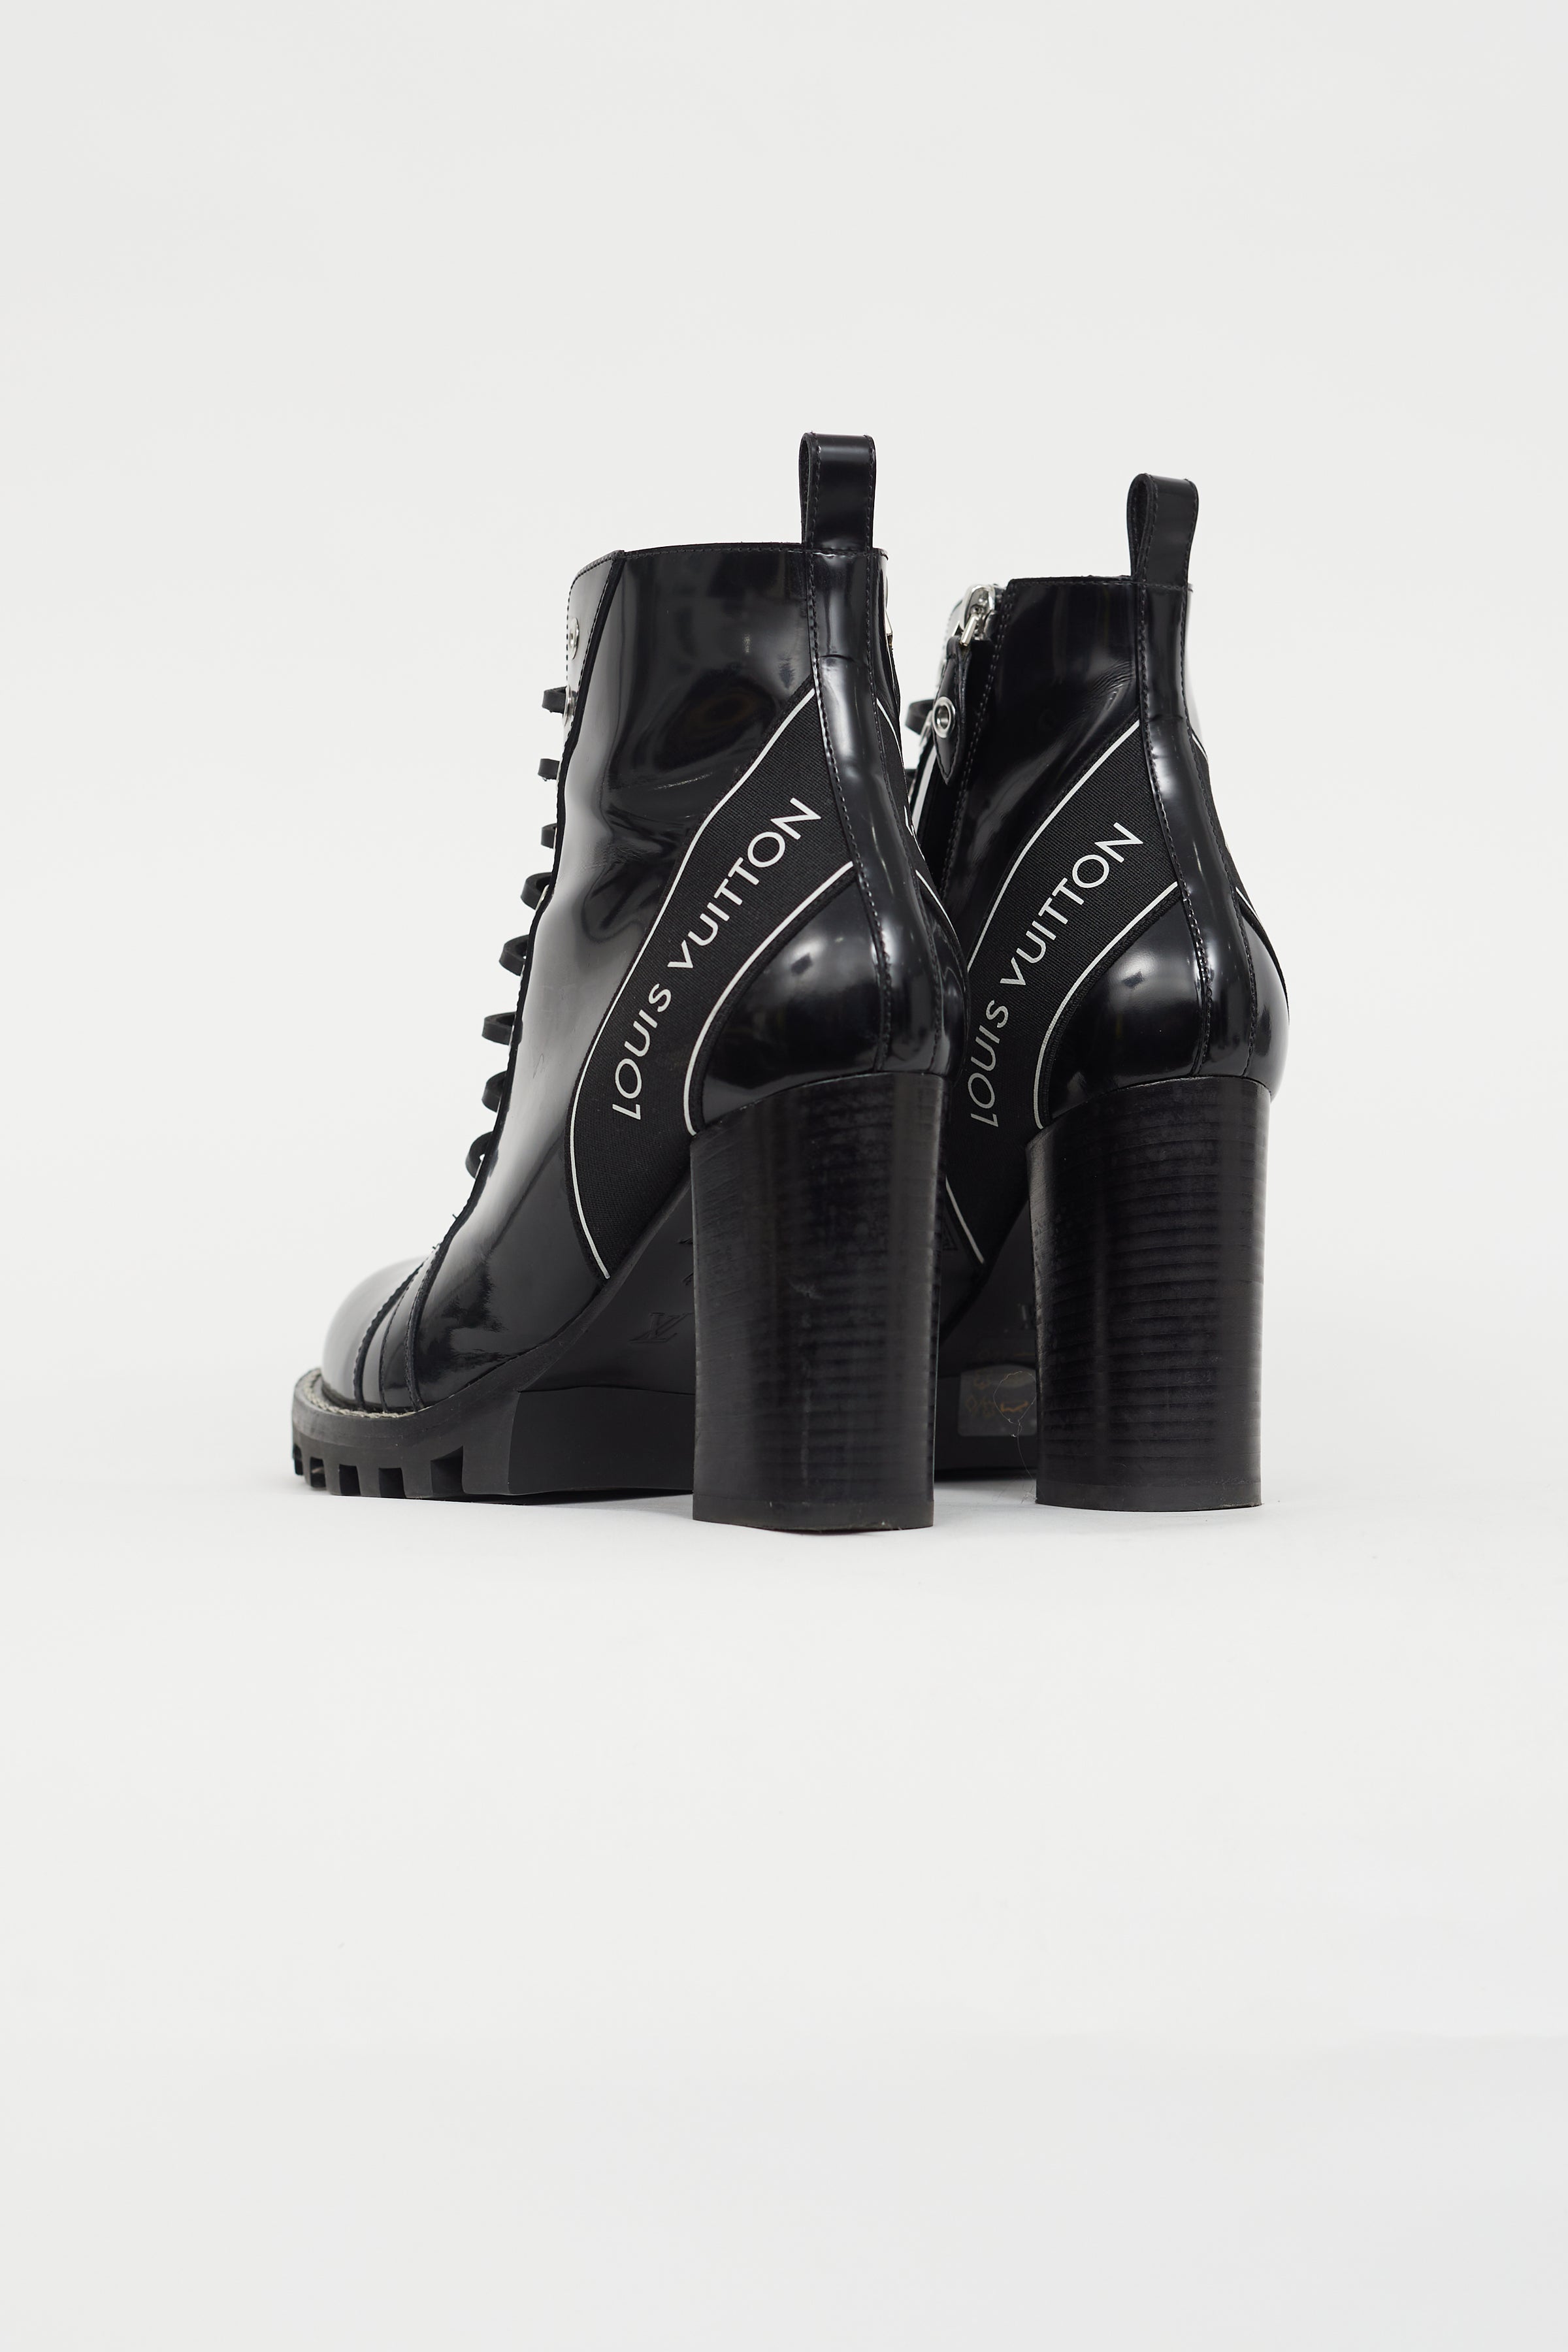 Louis Vuitton - Authenticated Star Trail Ankle Boots - Leather Black for Women, Never Worn